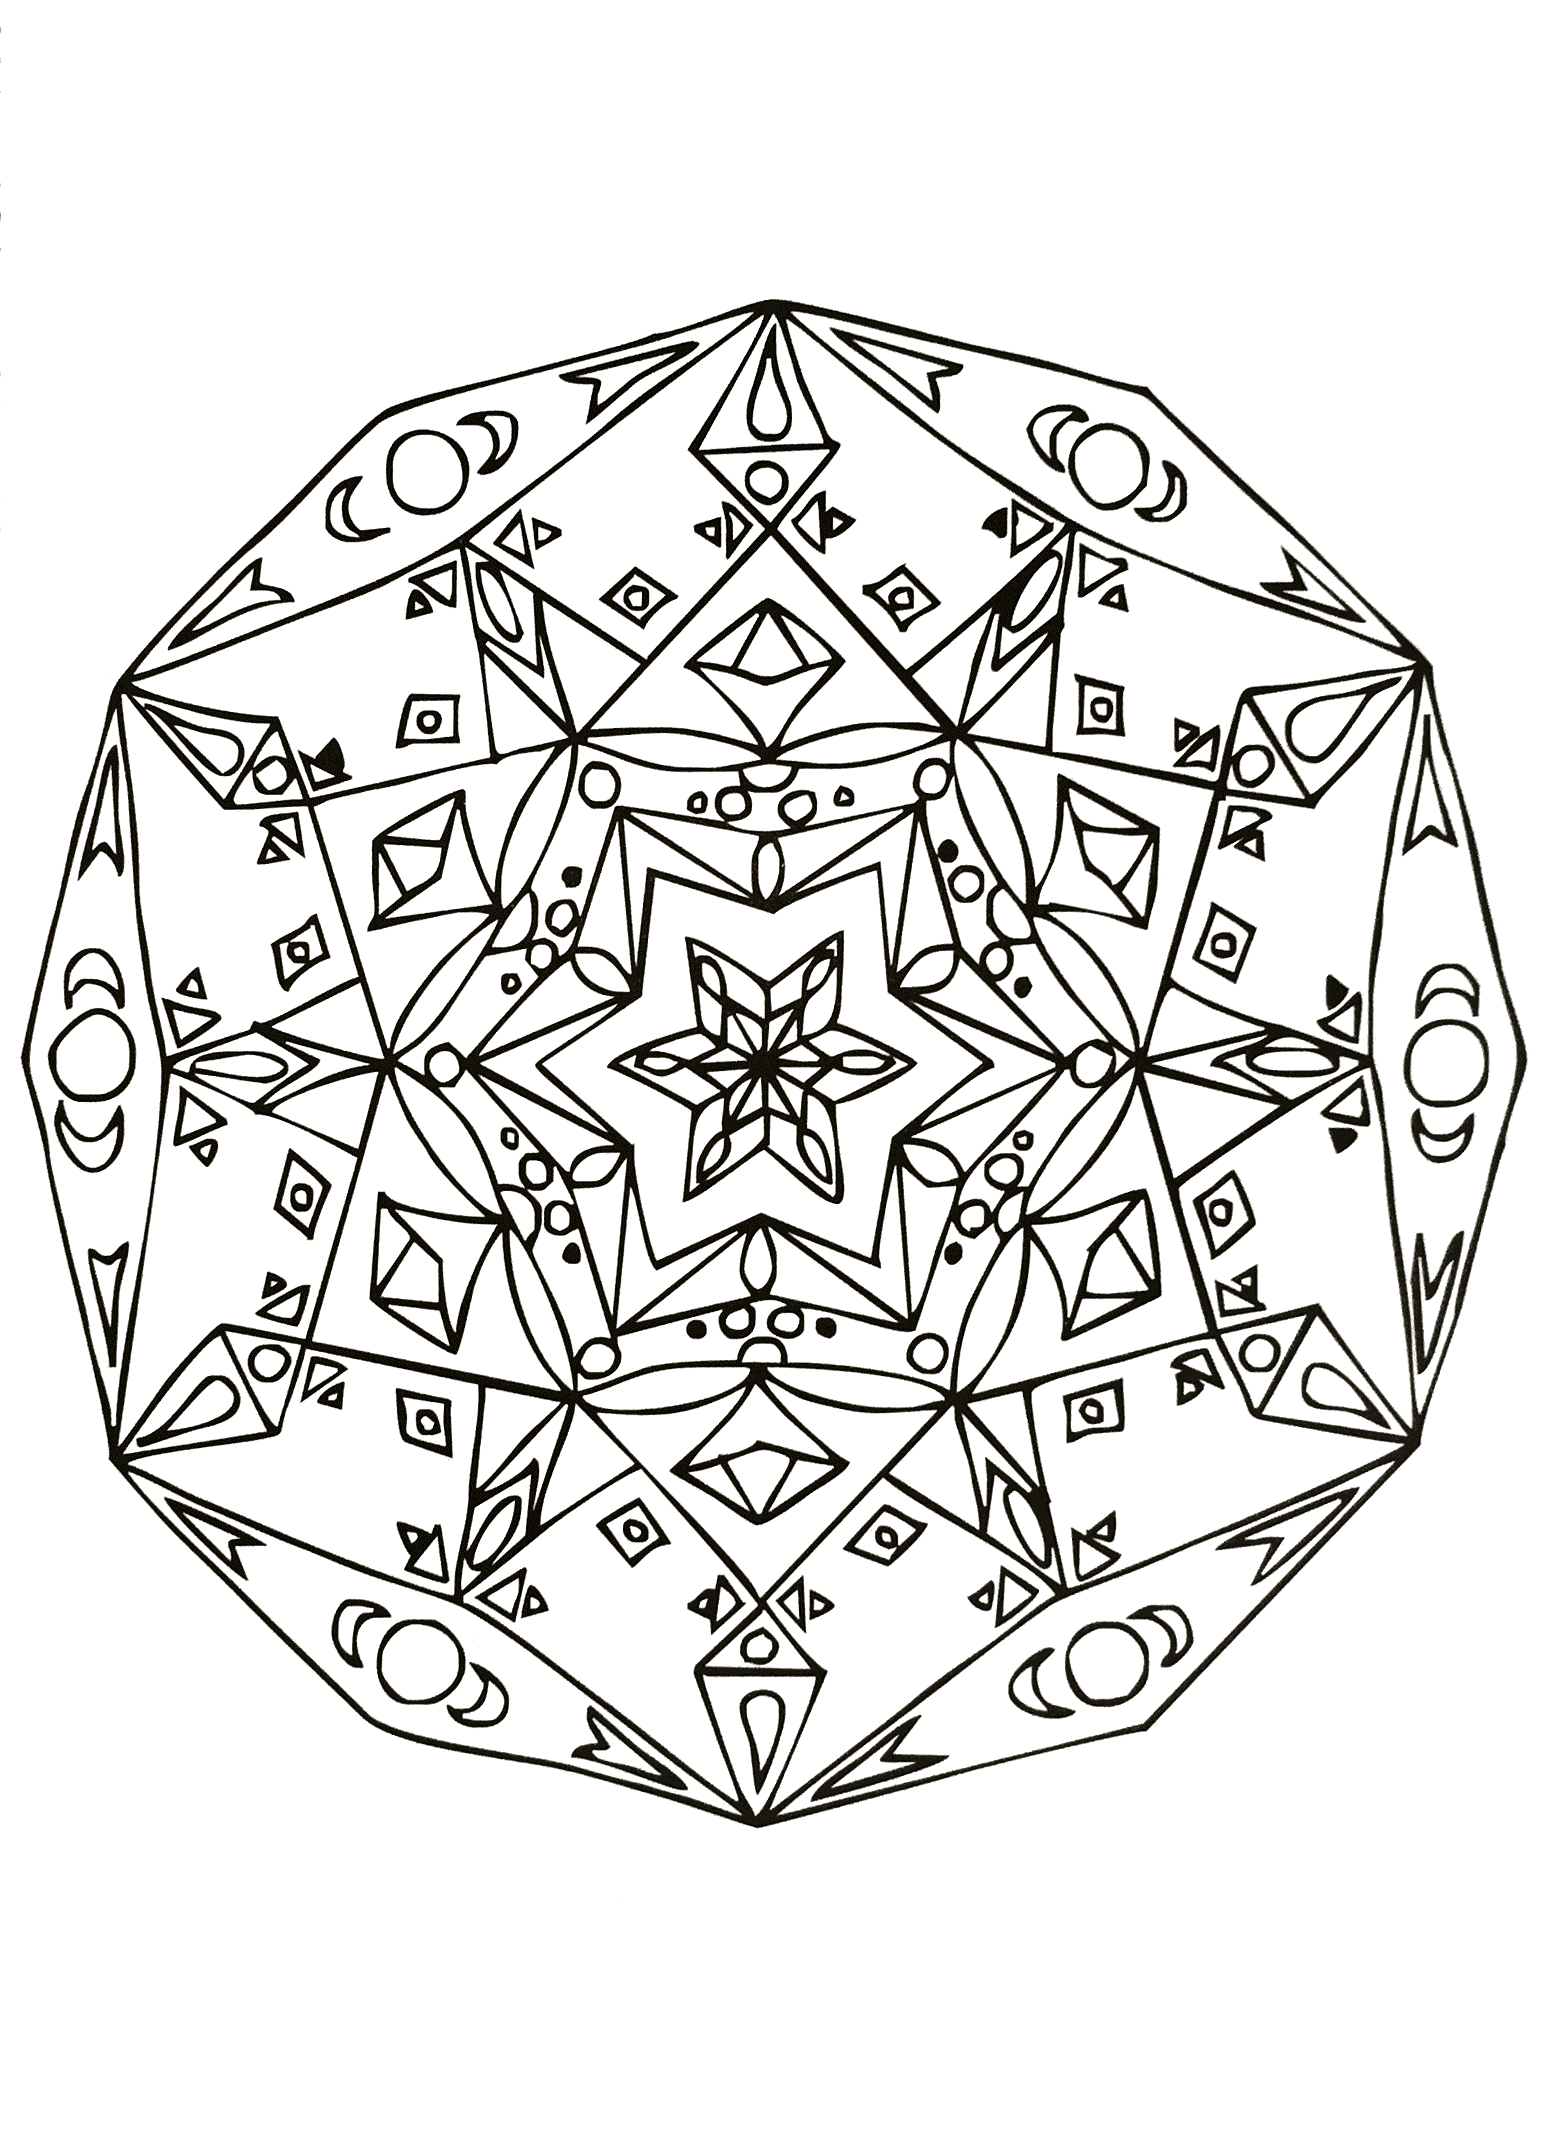 A Mandala quite difficult to color, perfect if you like to color small areas, and if you like various details.